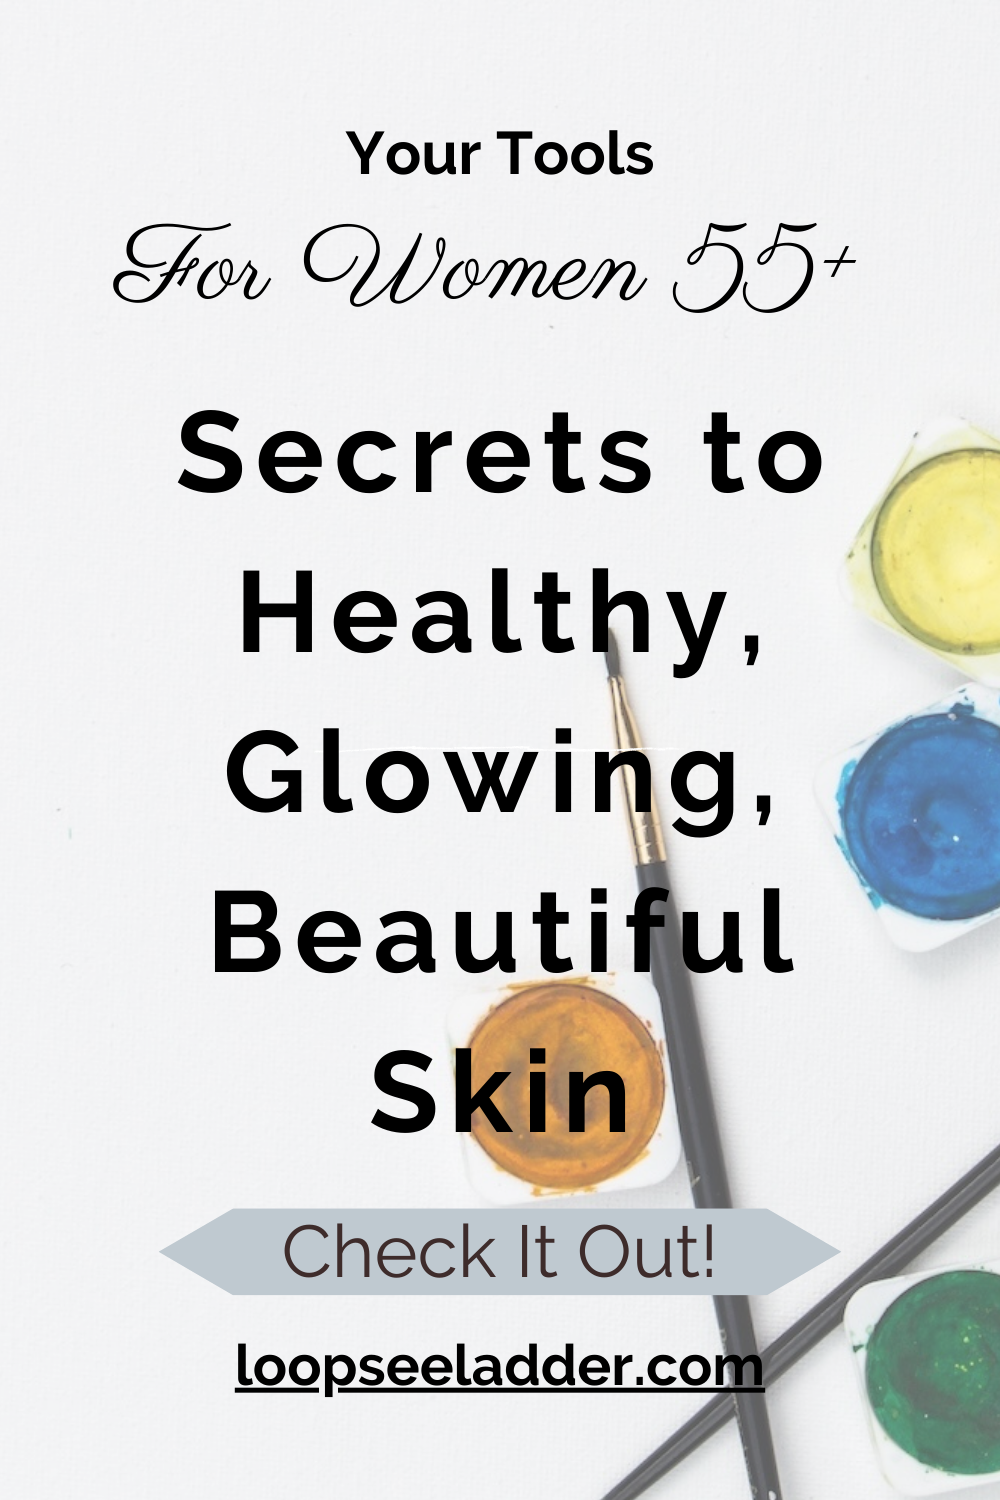 Glowing at 55+: Secrets to Healthy and Beautiful Skin Revealed.